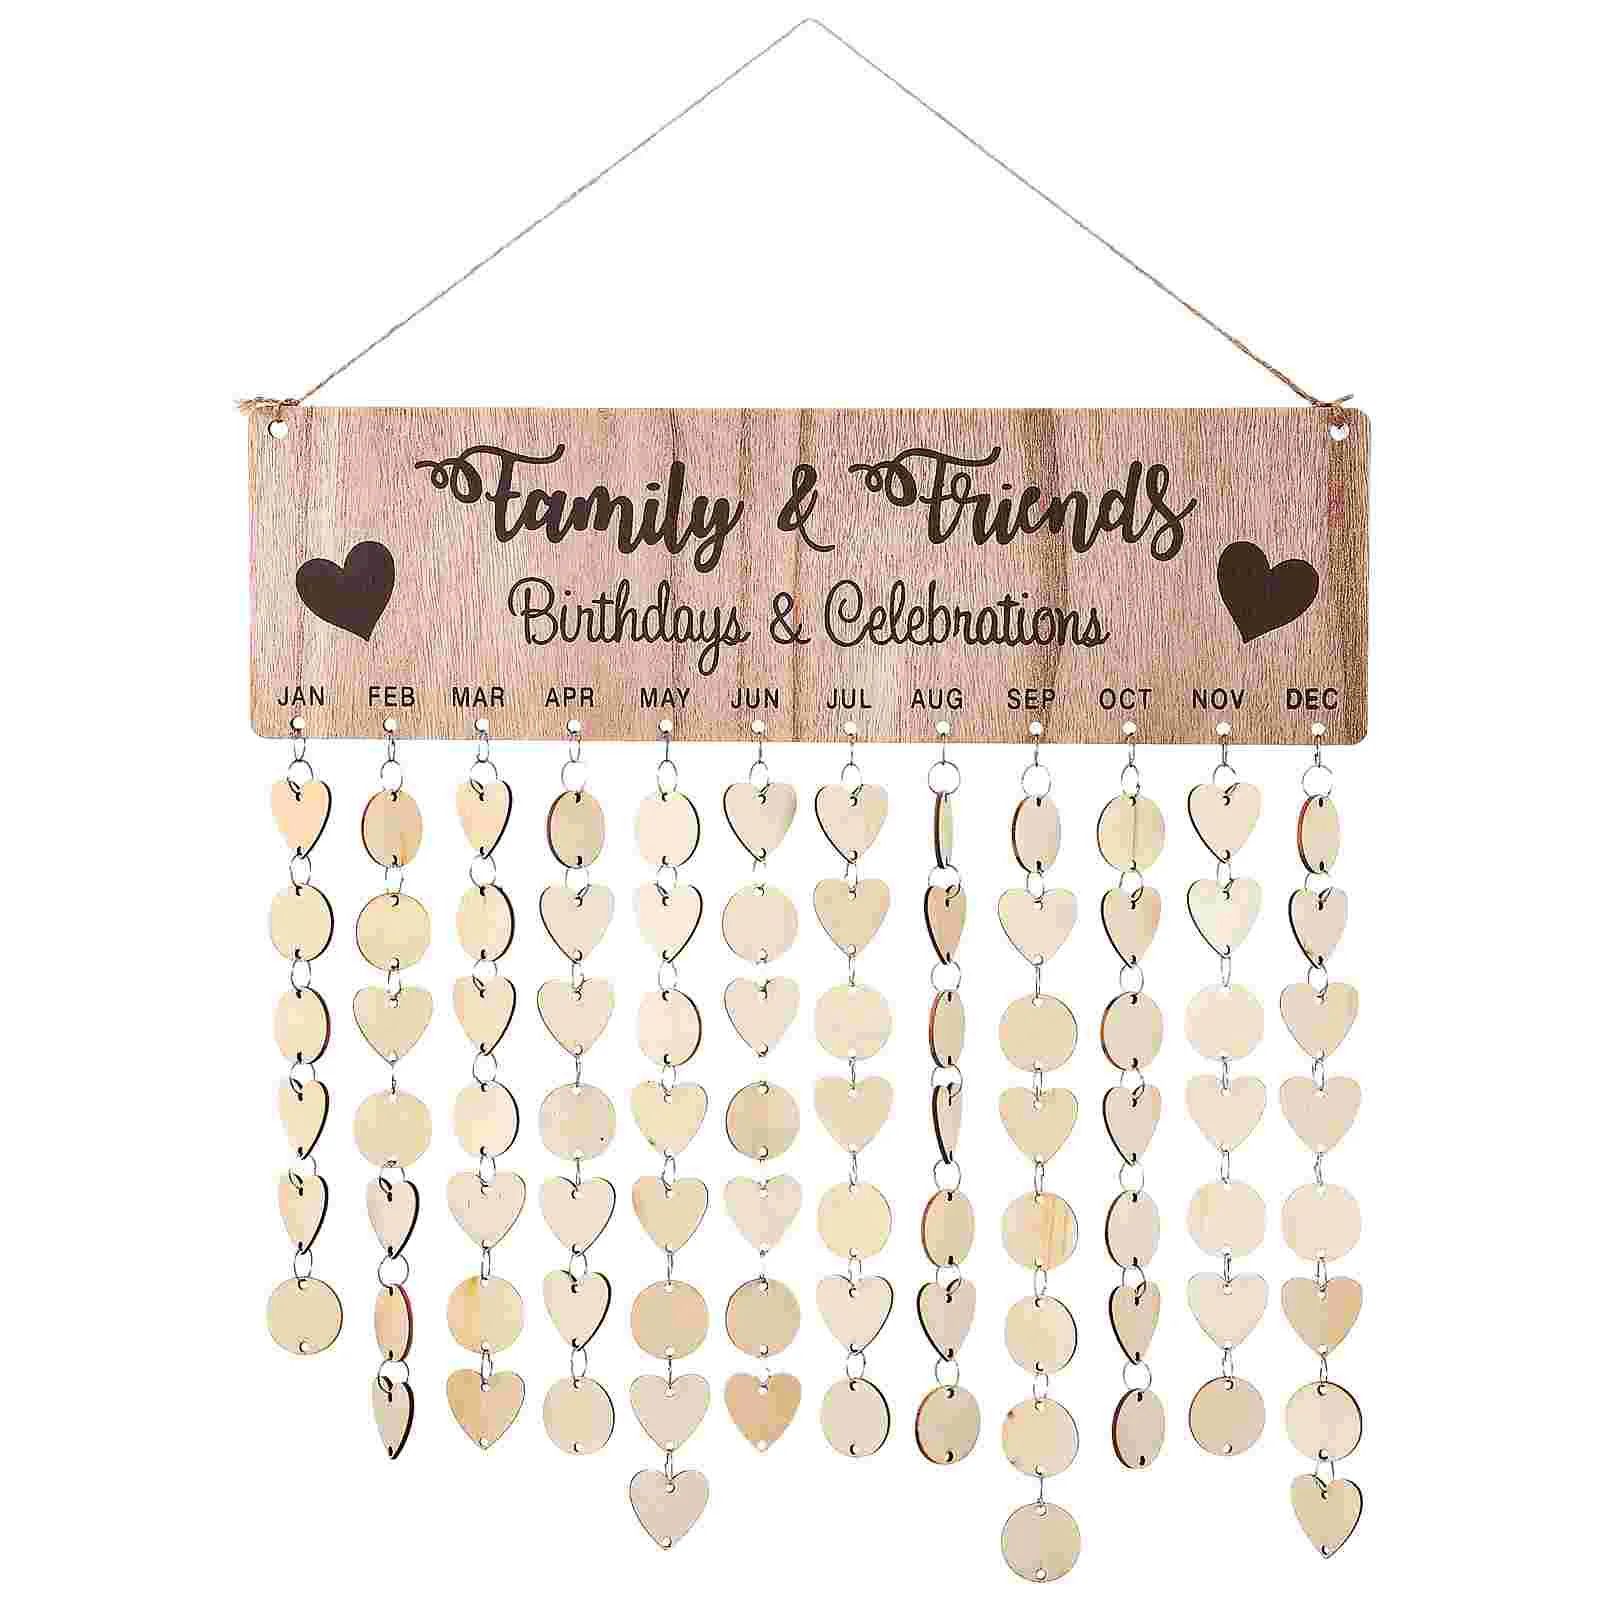 Calendars Wall Wood Hanging Wooden Countdown Tag Birthday Reminder Board Family Sign for reminder birthday calendar board wooden plaque wall hanging heartslice discs tag family decor